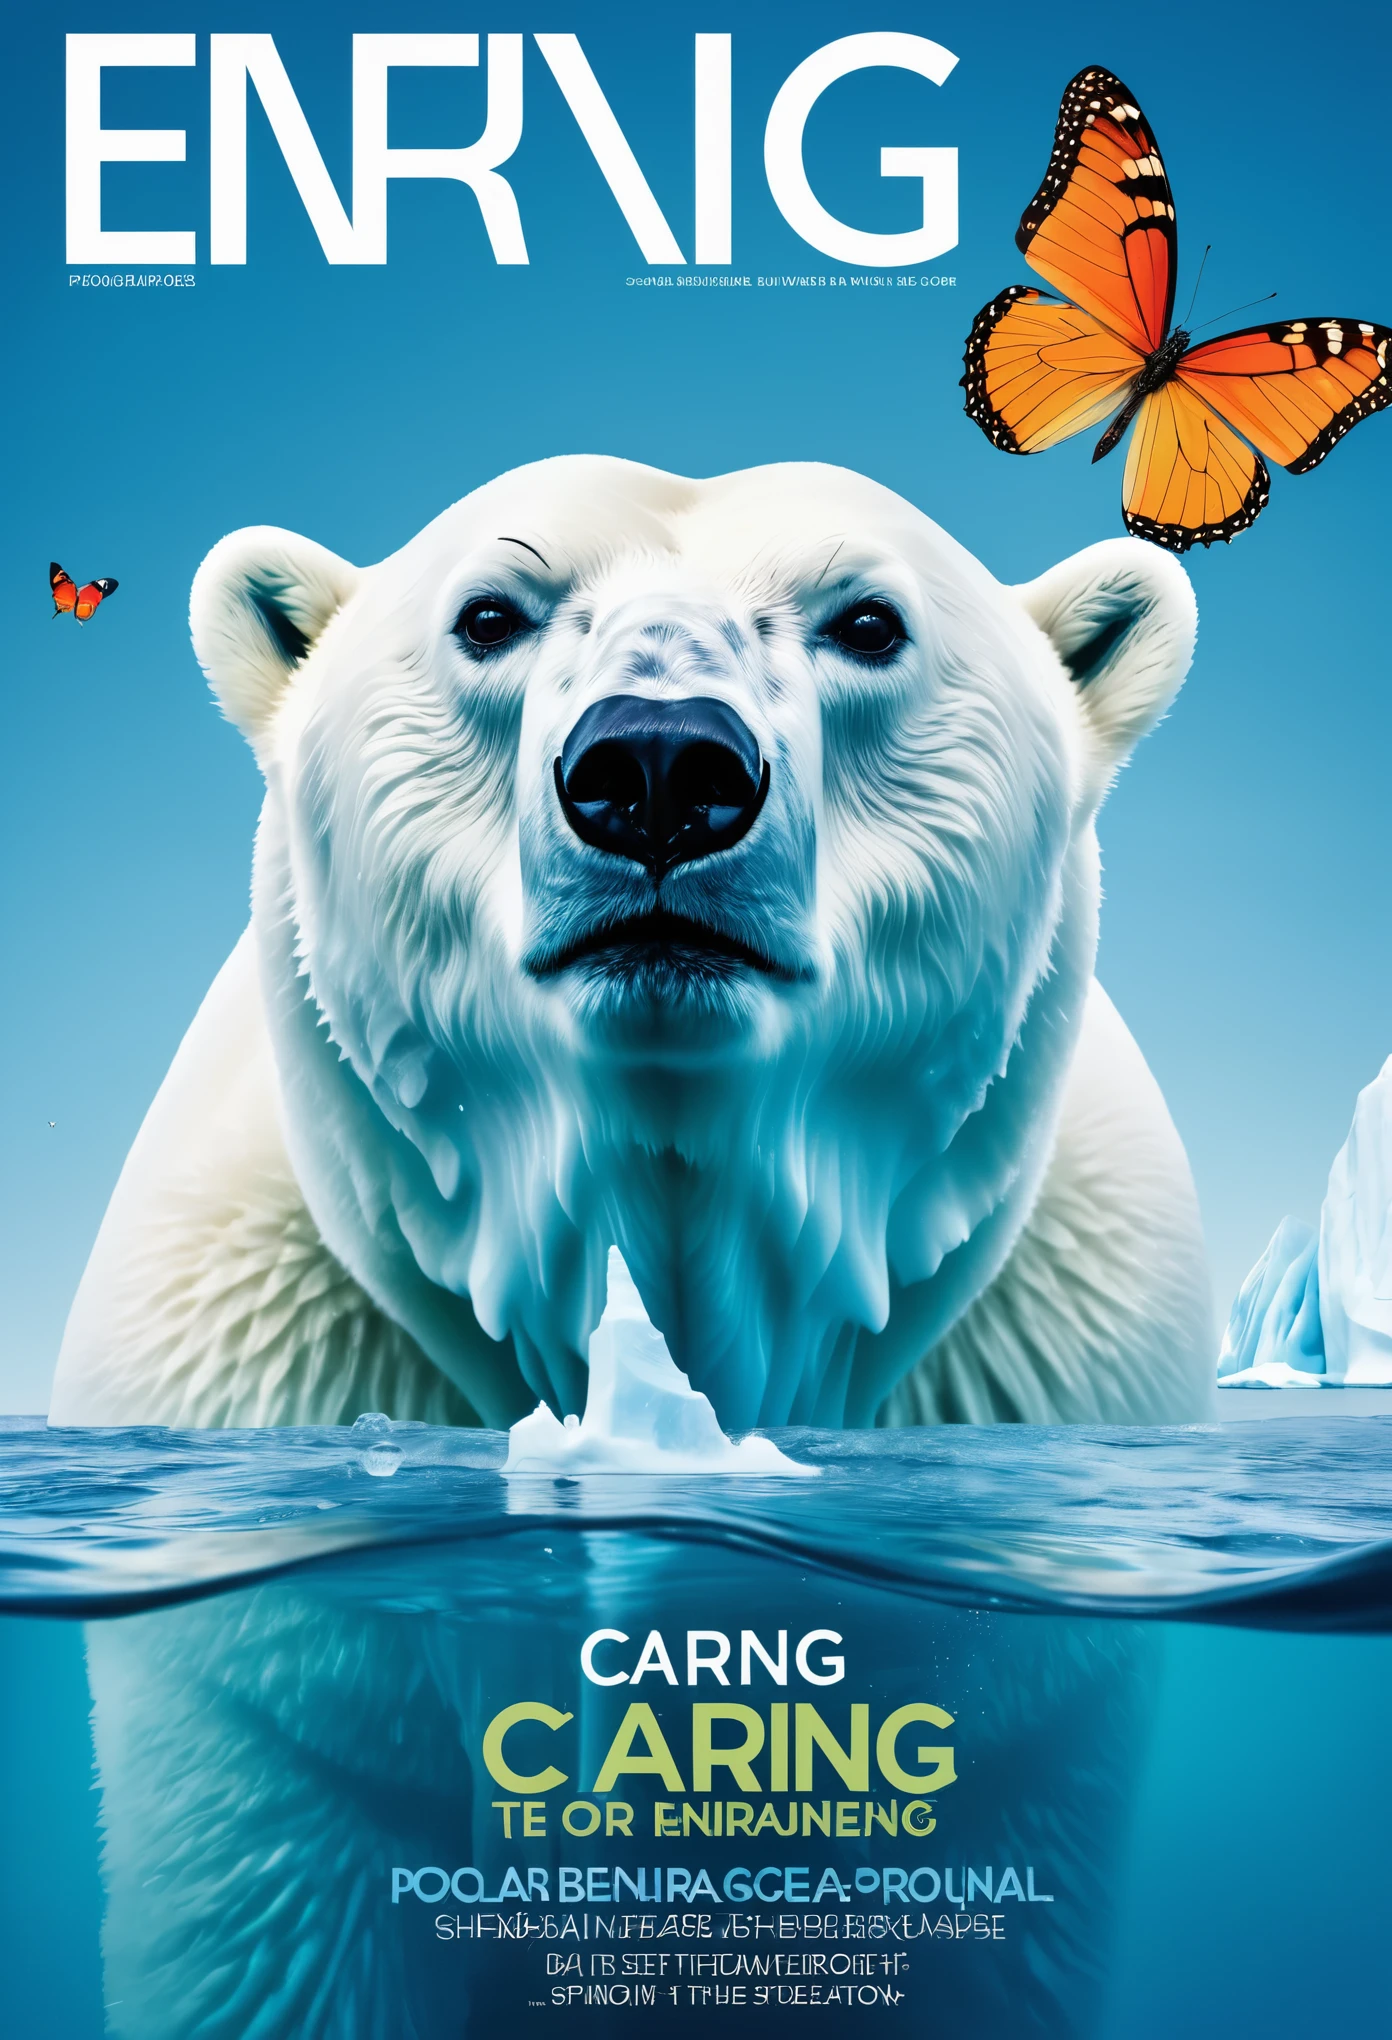 Fashion magazine cover design，Iceberg and polar bear，a colorful butterfly，text，barcode，Stylish and simple，The theme highlights caring for the environment